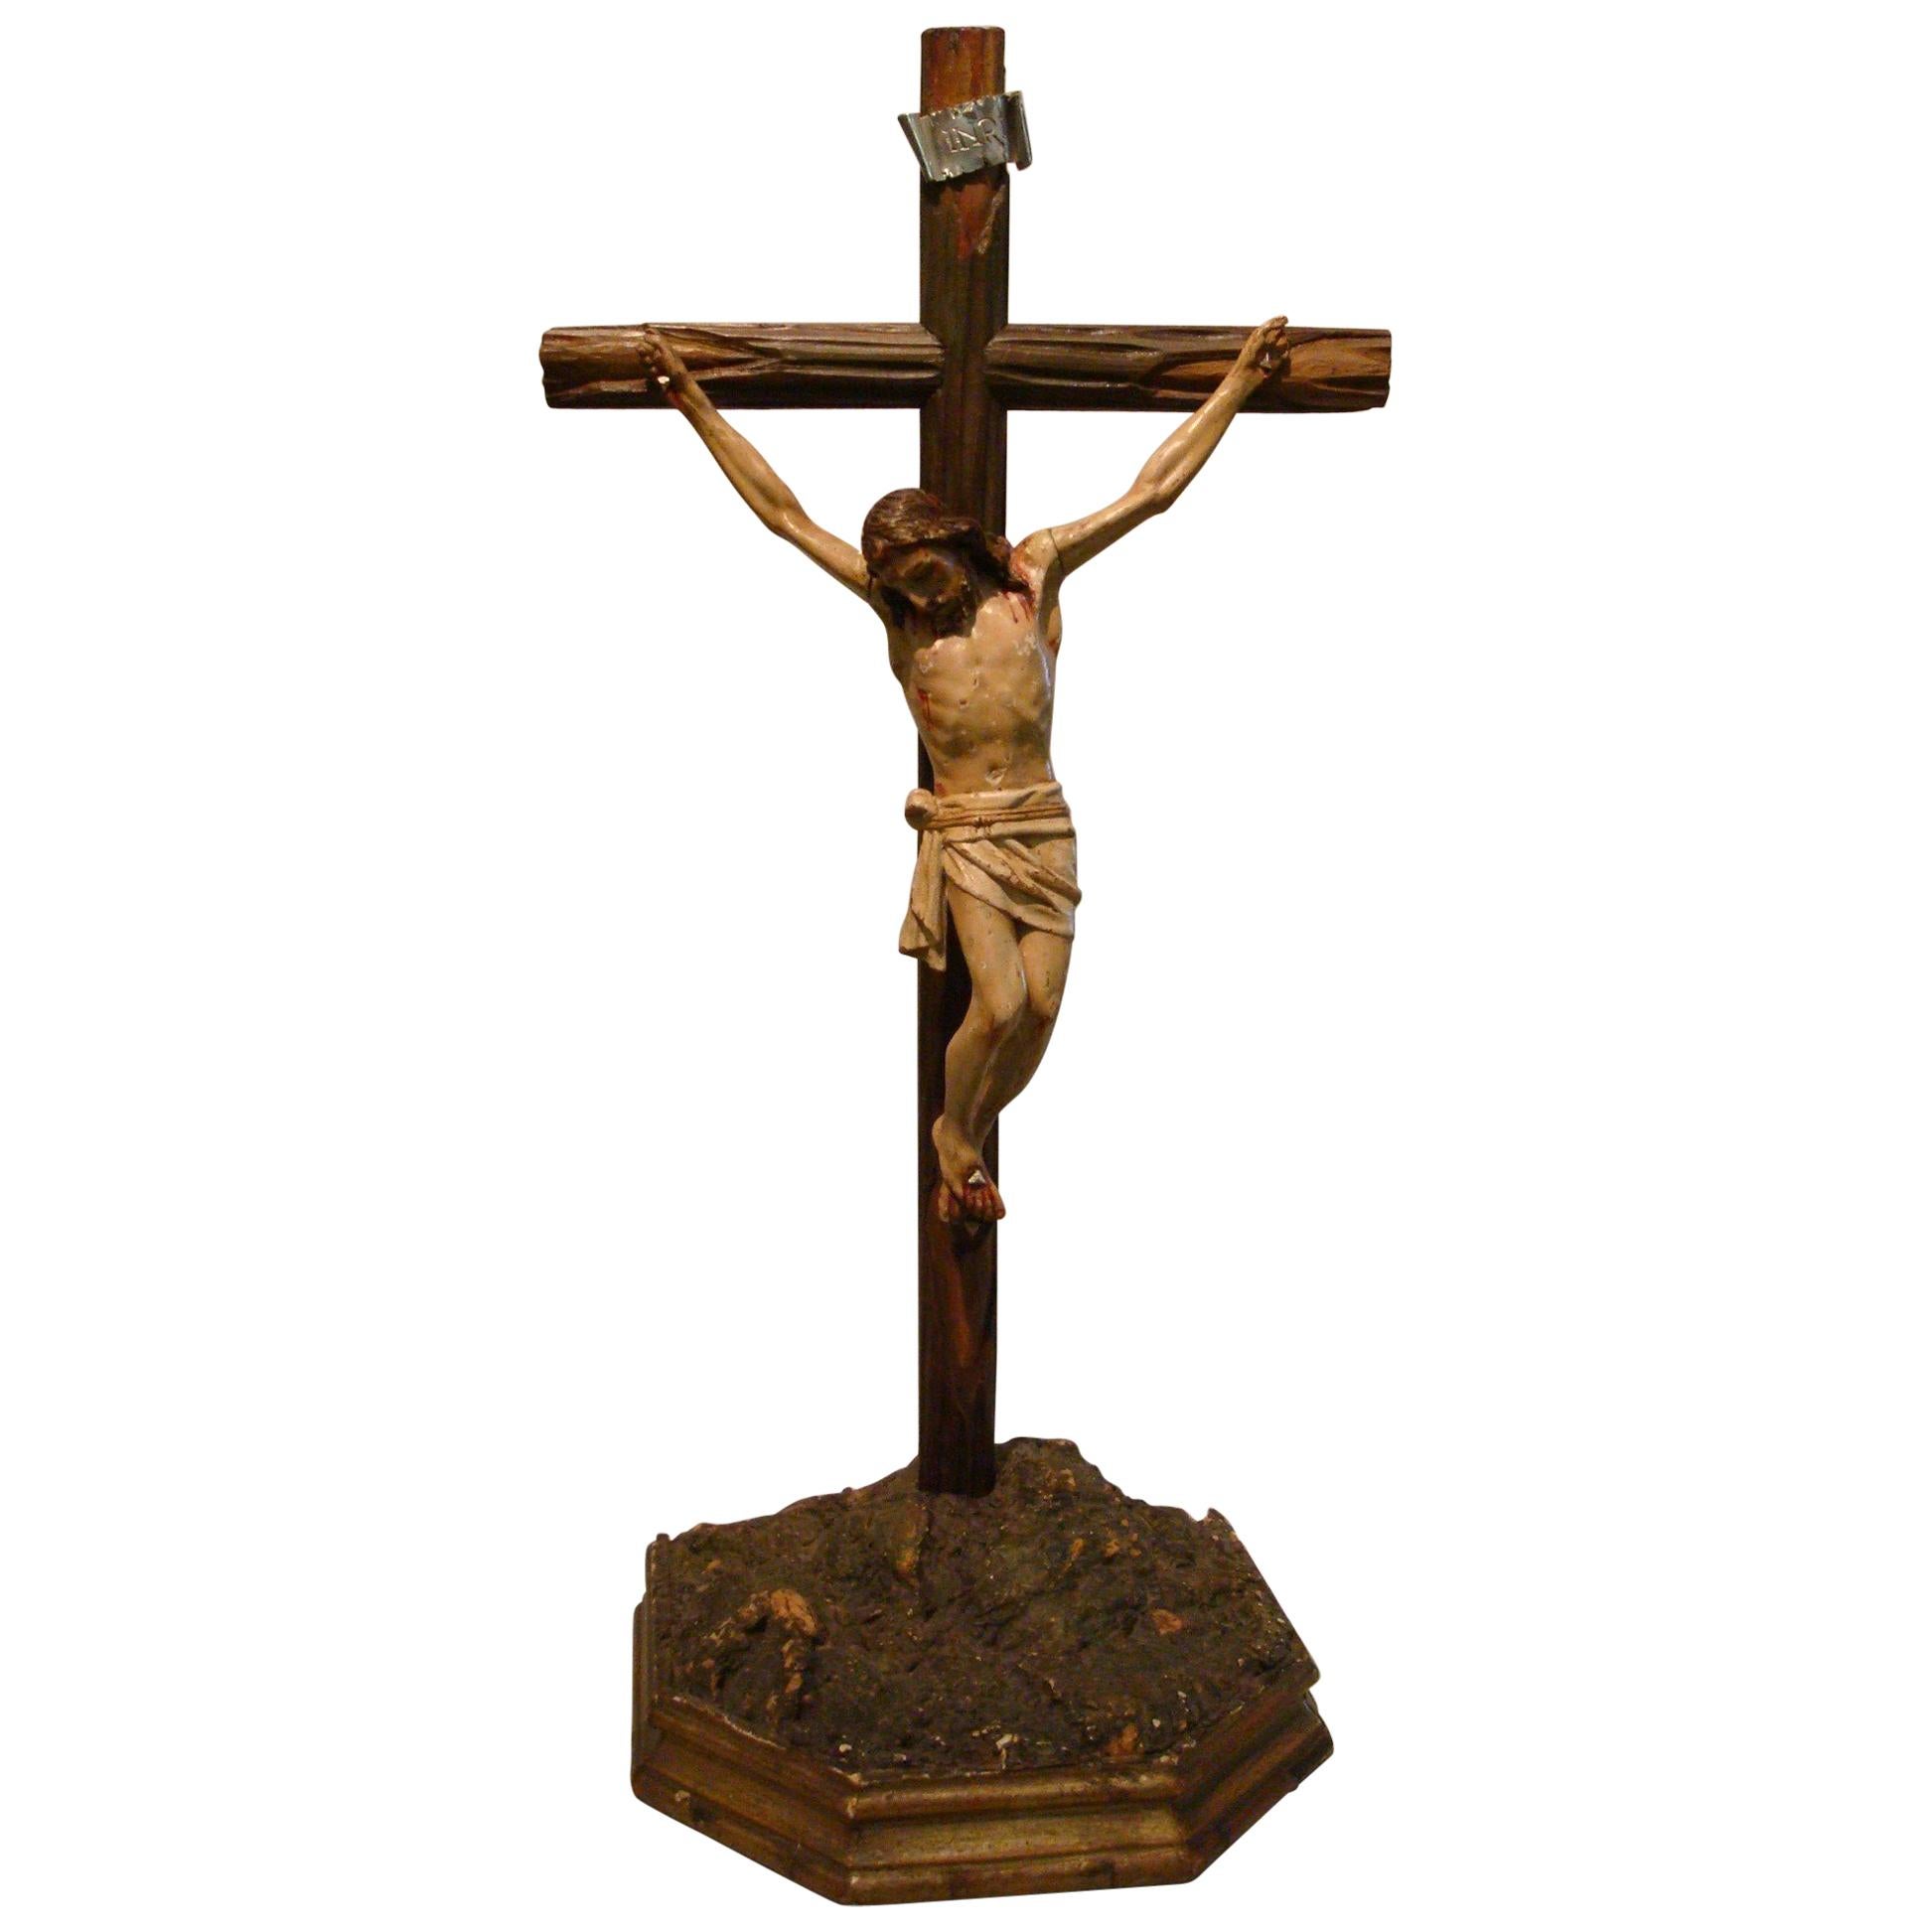 Hand Carved and Polychromed Wood Table Jesus Crucifix, circa 1850-1880